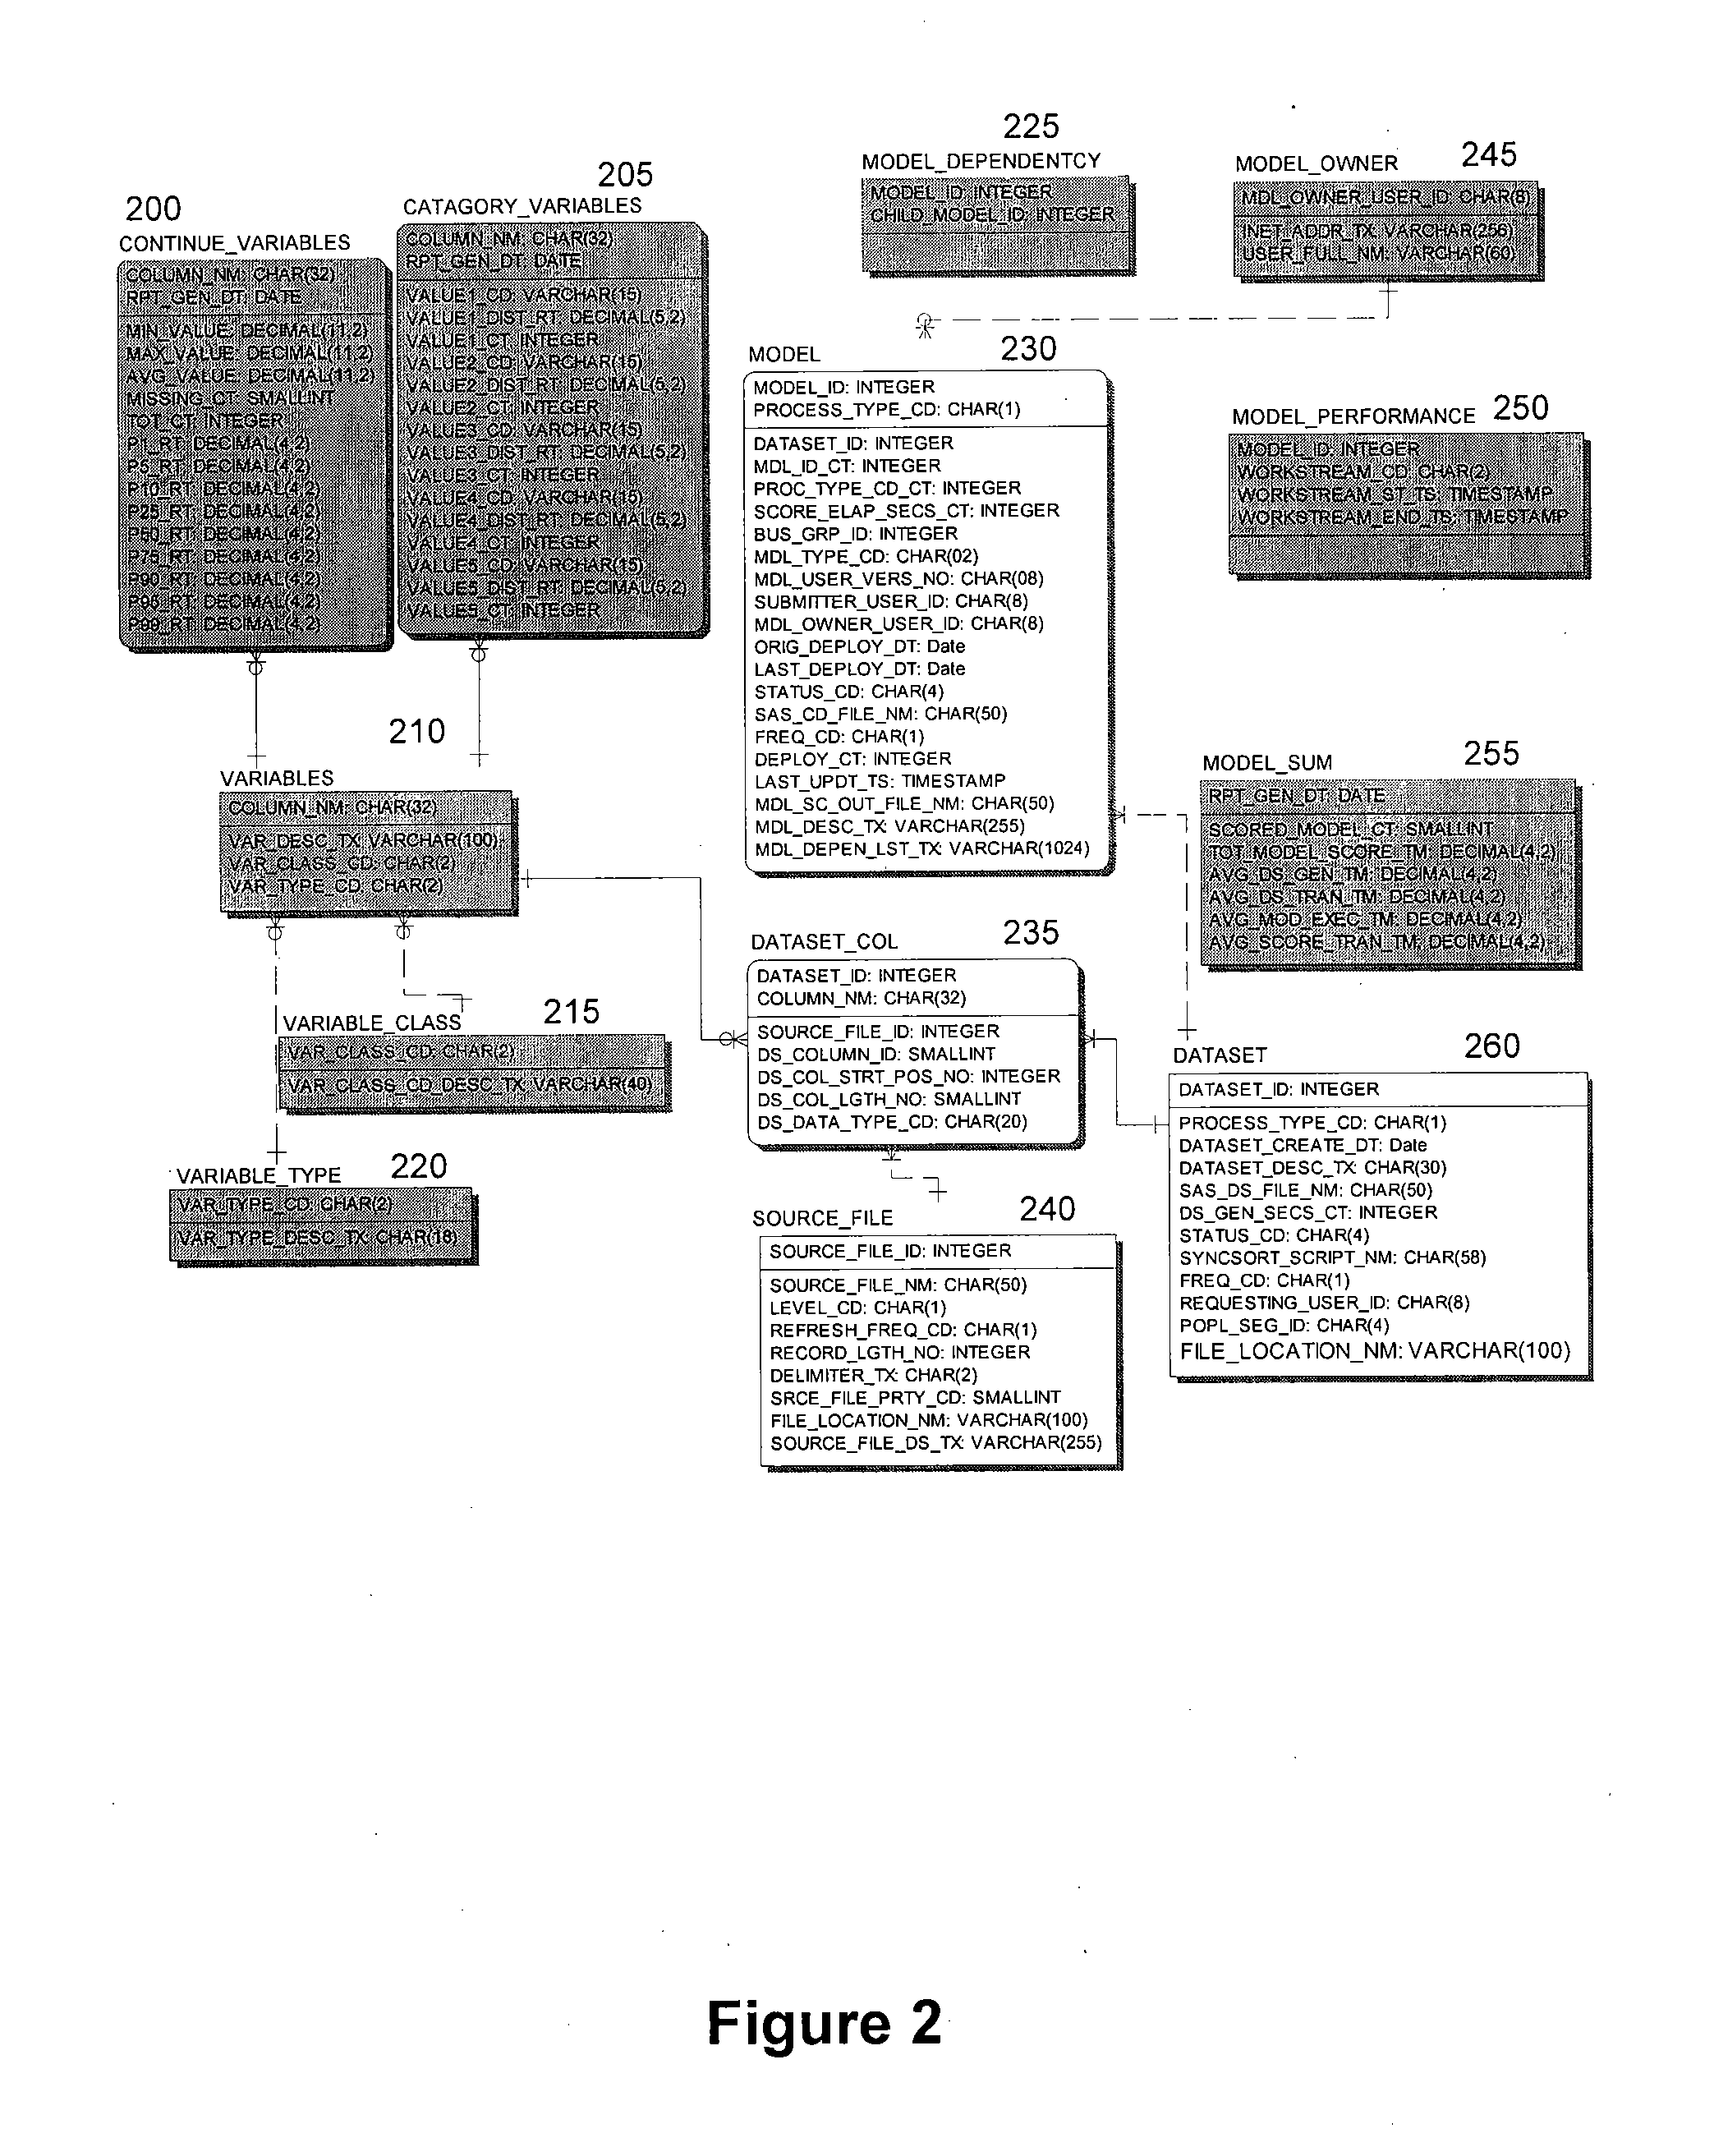 System and method for managing simulation models